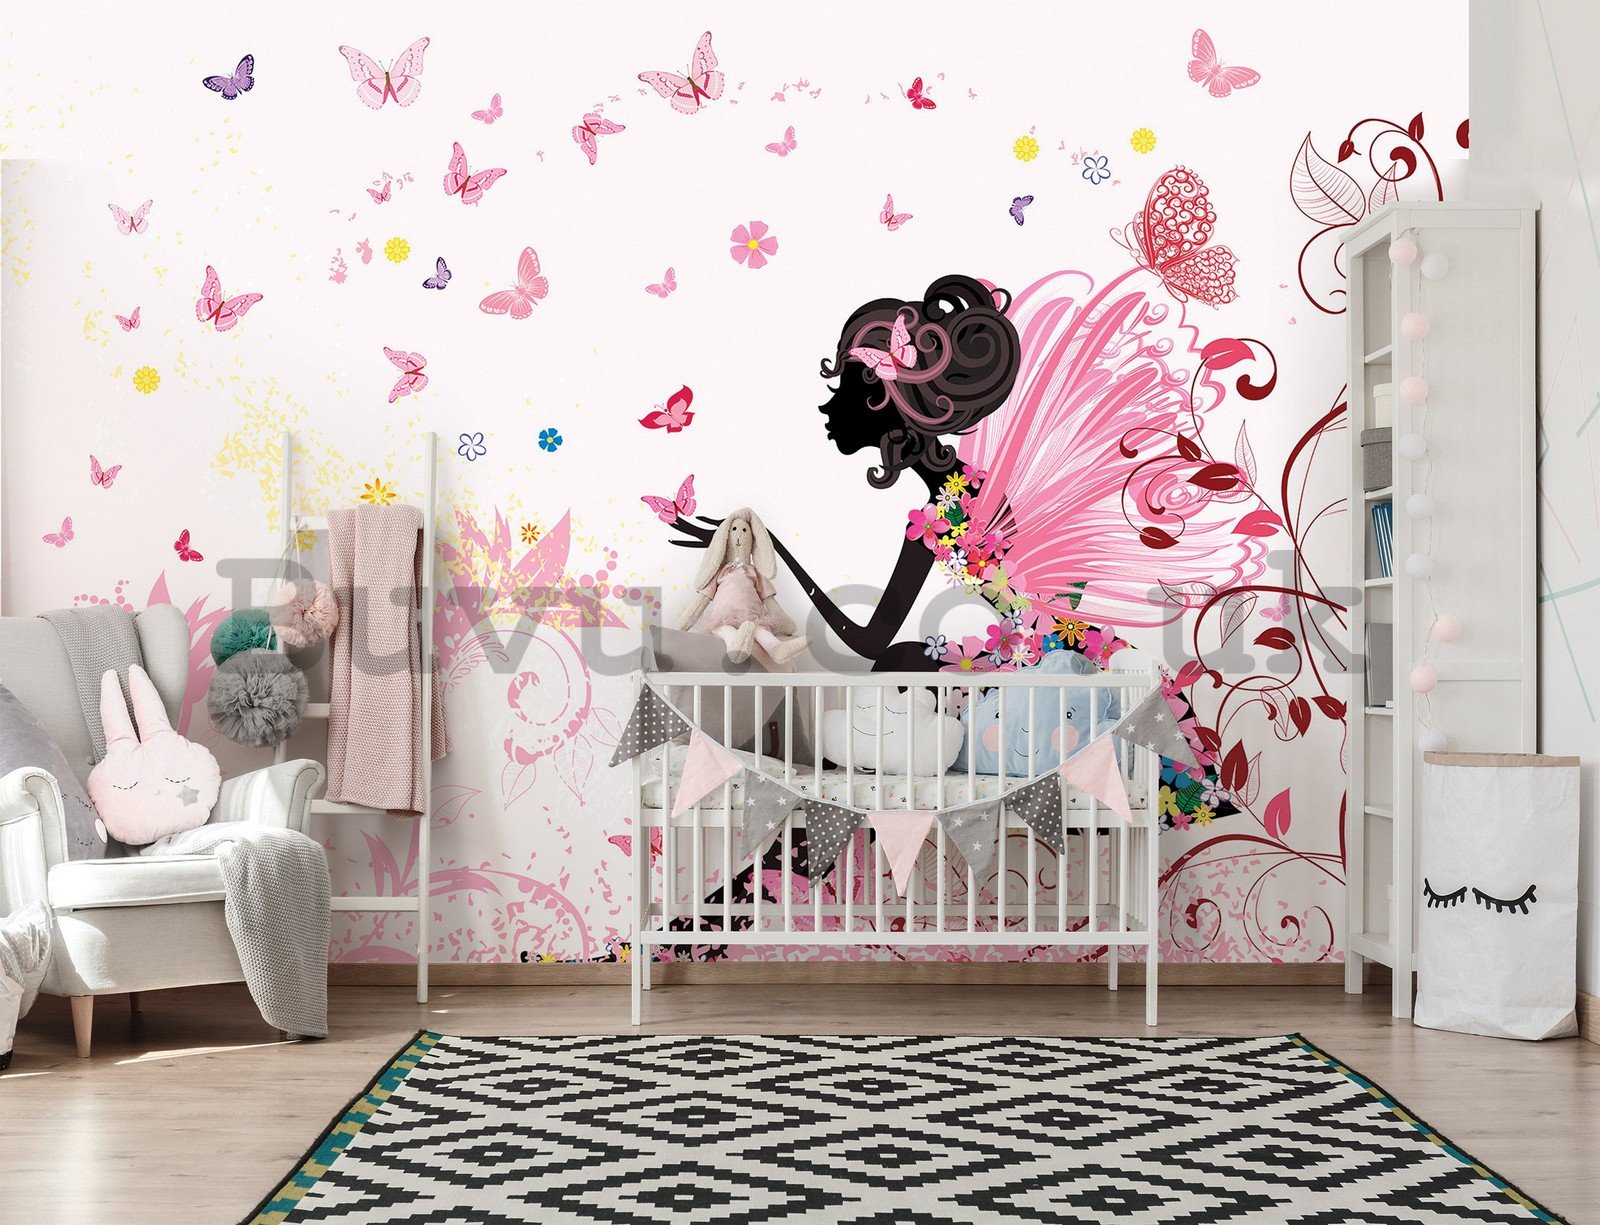 Wall mural vlies: Girl with flowers and butterflies - 368x254 cm